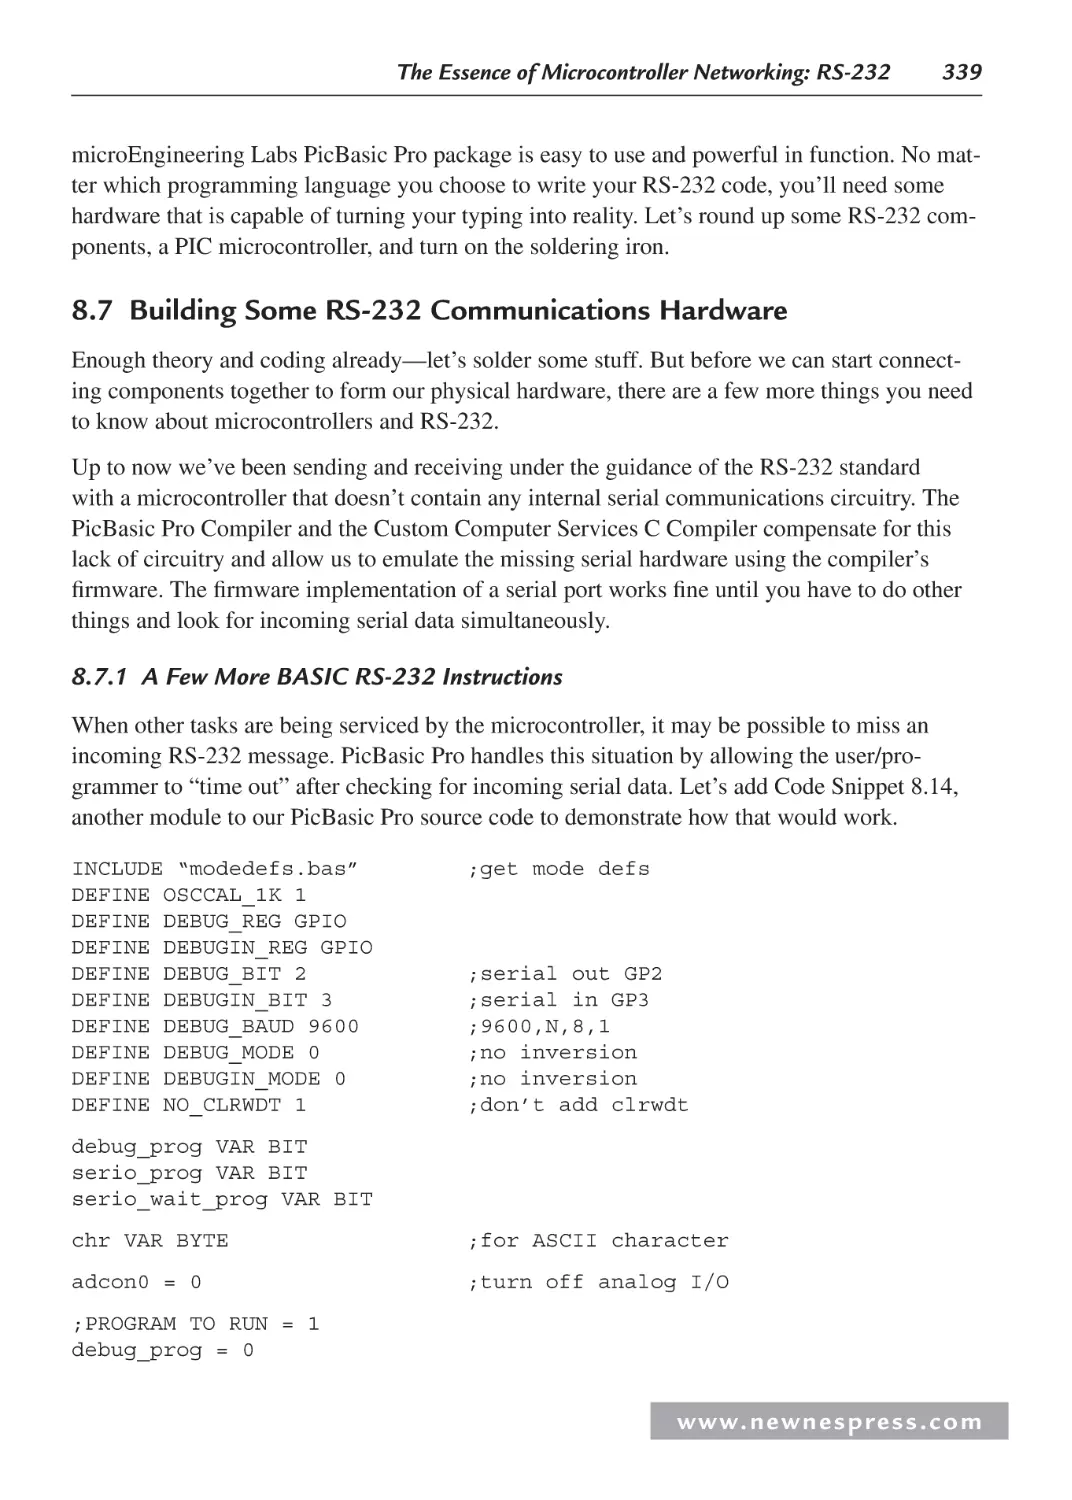 8.7 Building Some RS-232 Communications Hardware